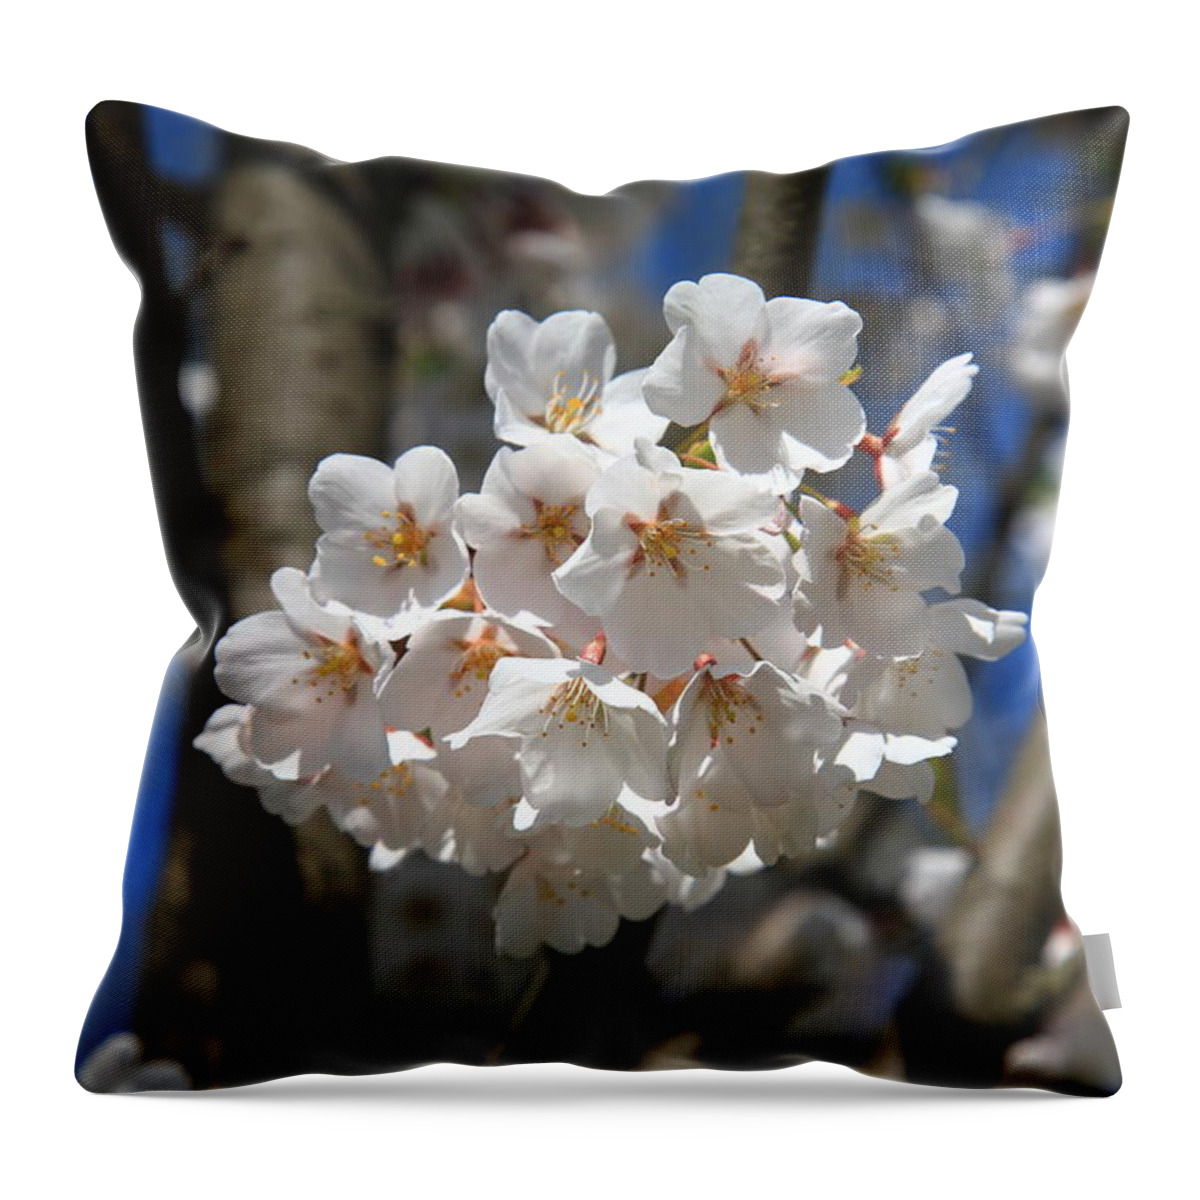 Art Throw Pillow featuring the photograph Wild Flowers by Frank Romeo